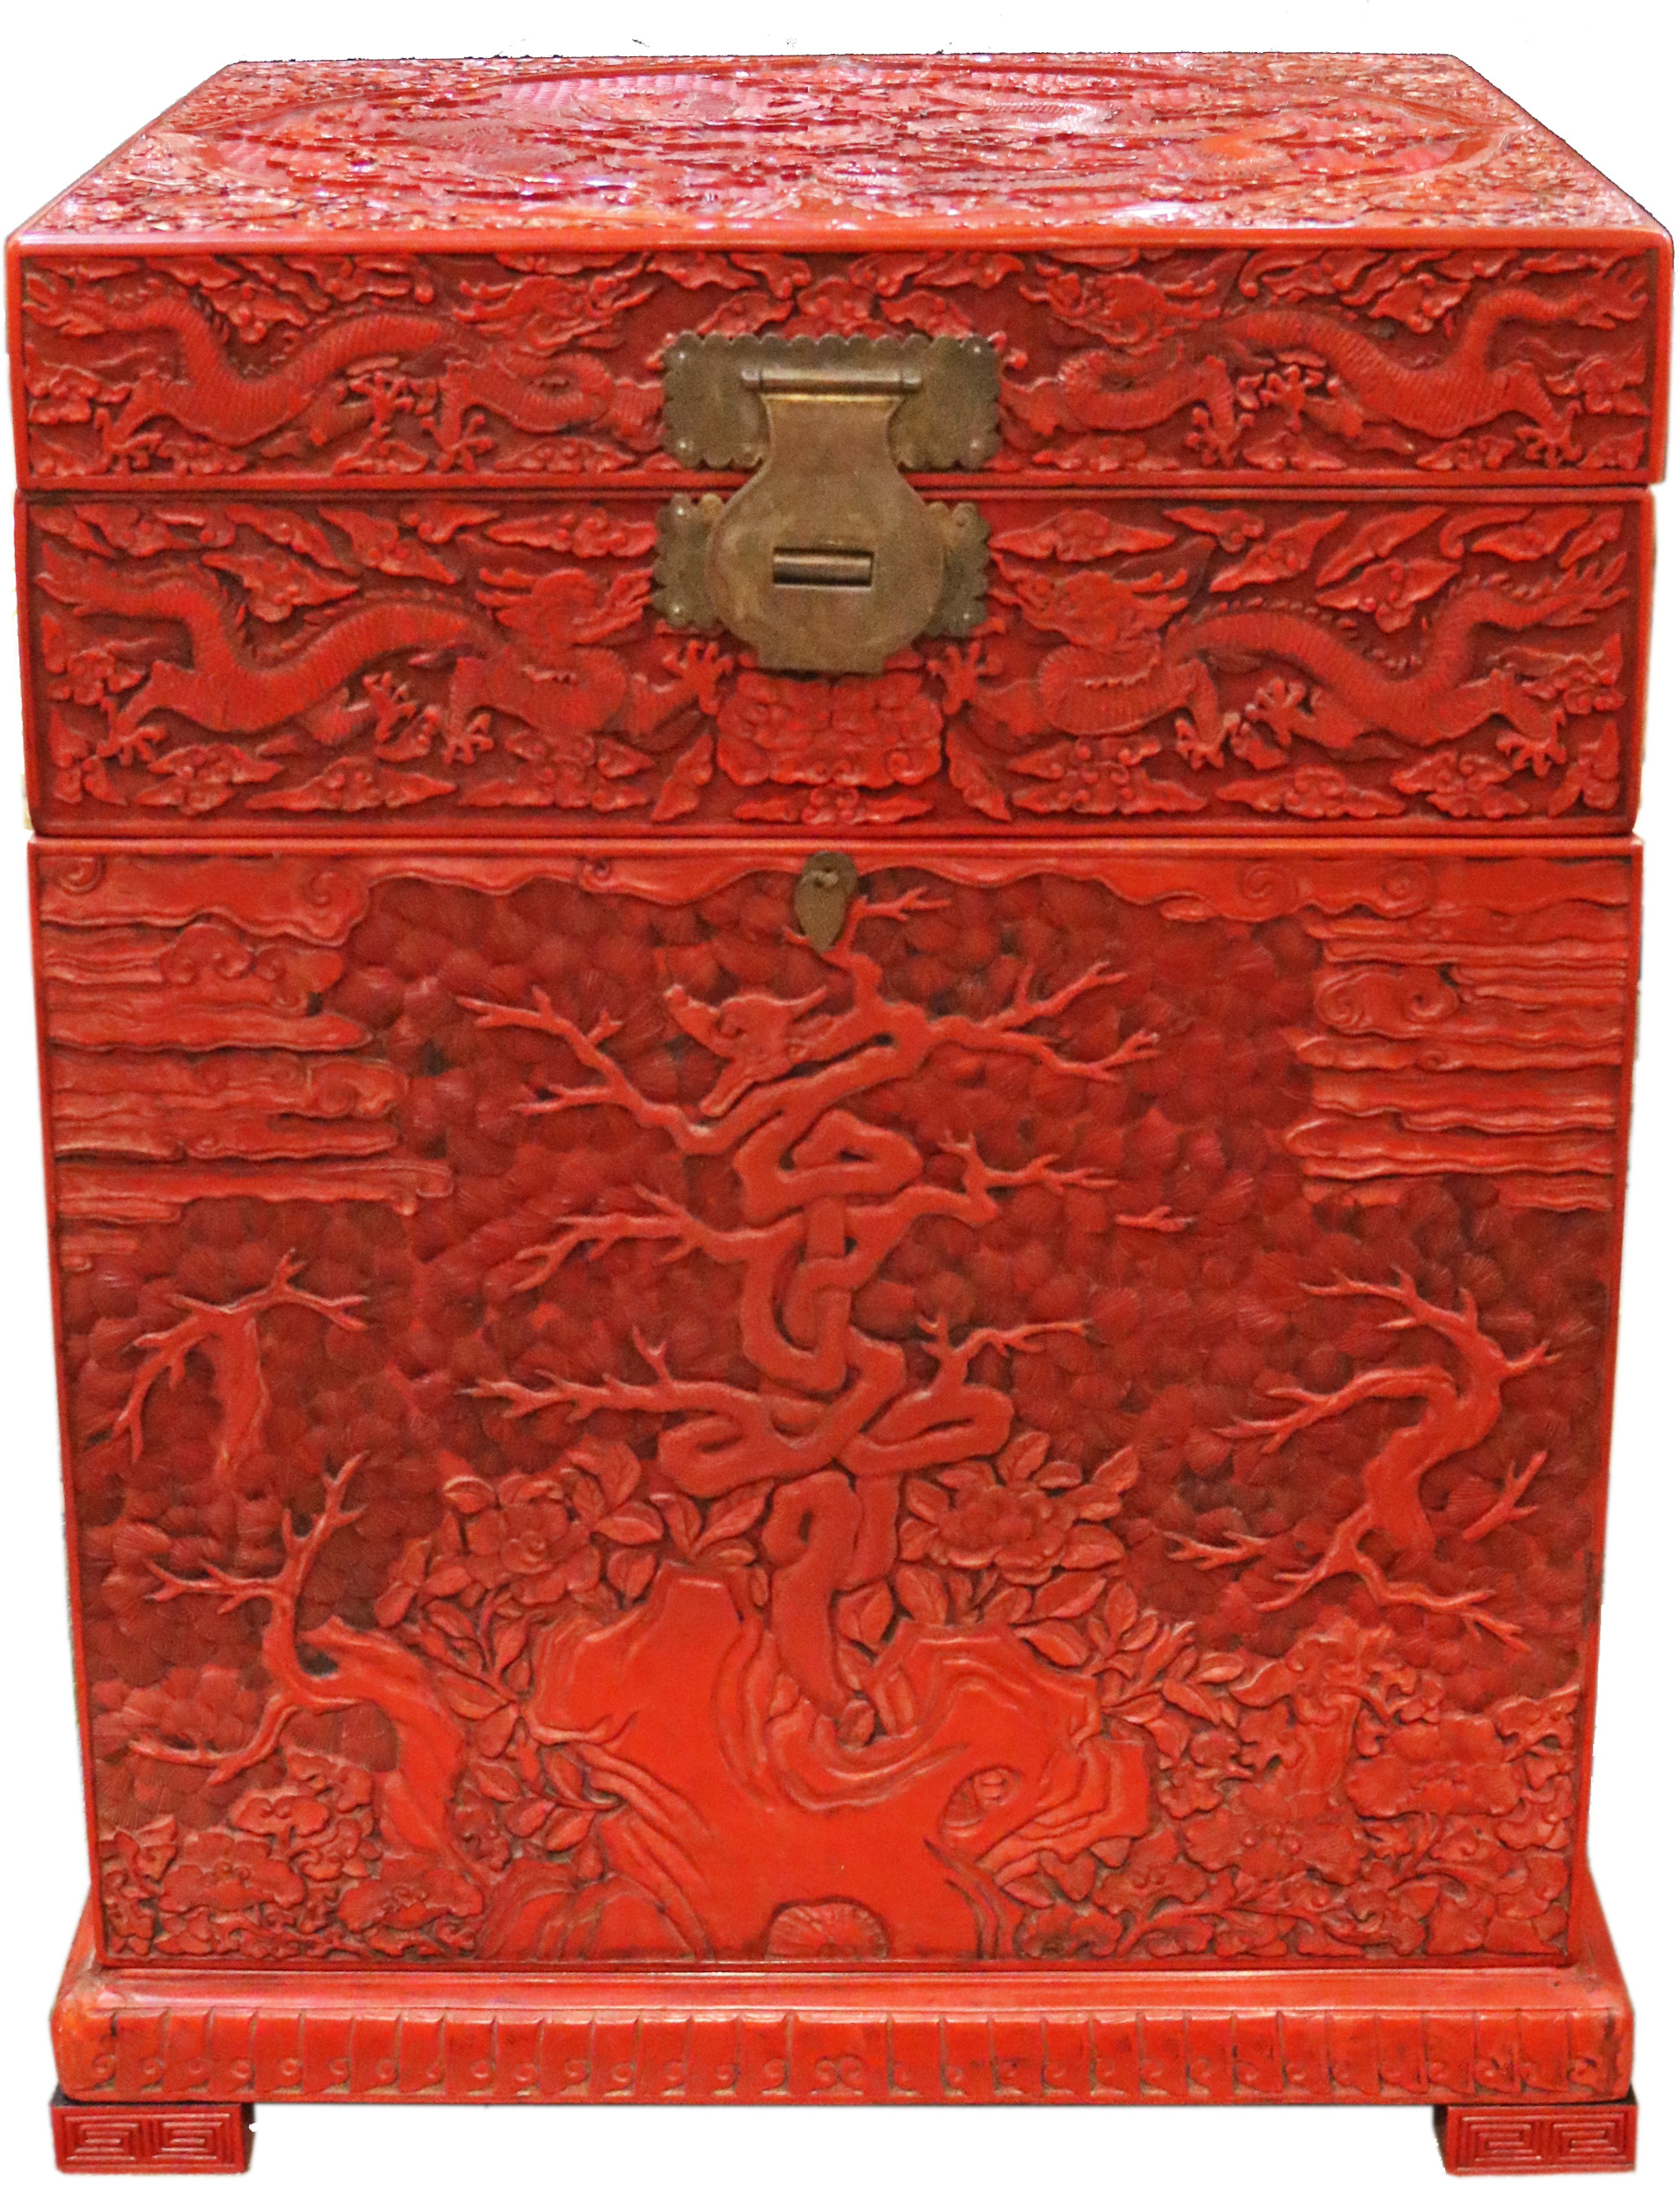 A Vibrant 19th Century Chinese Cinnabar Apothecary Chest No. 4769